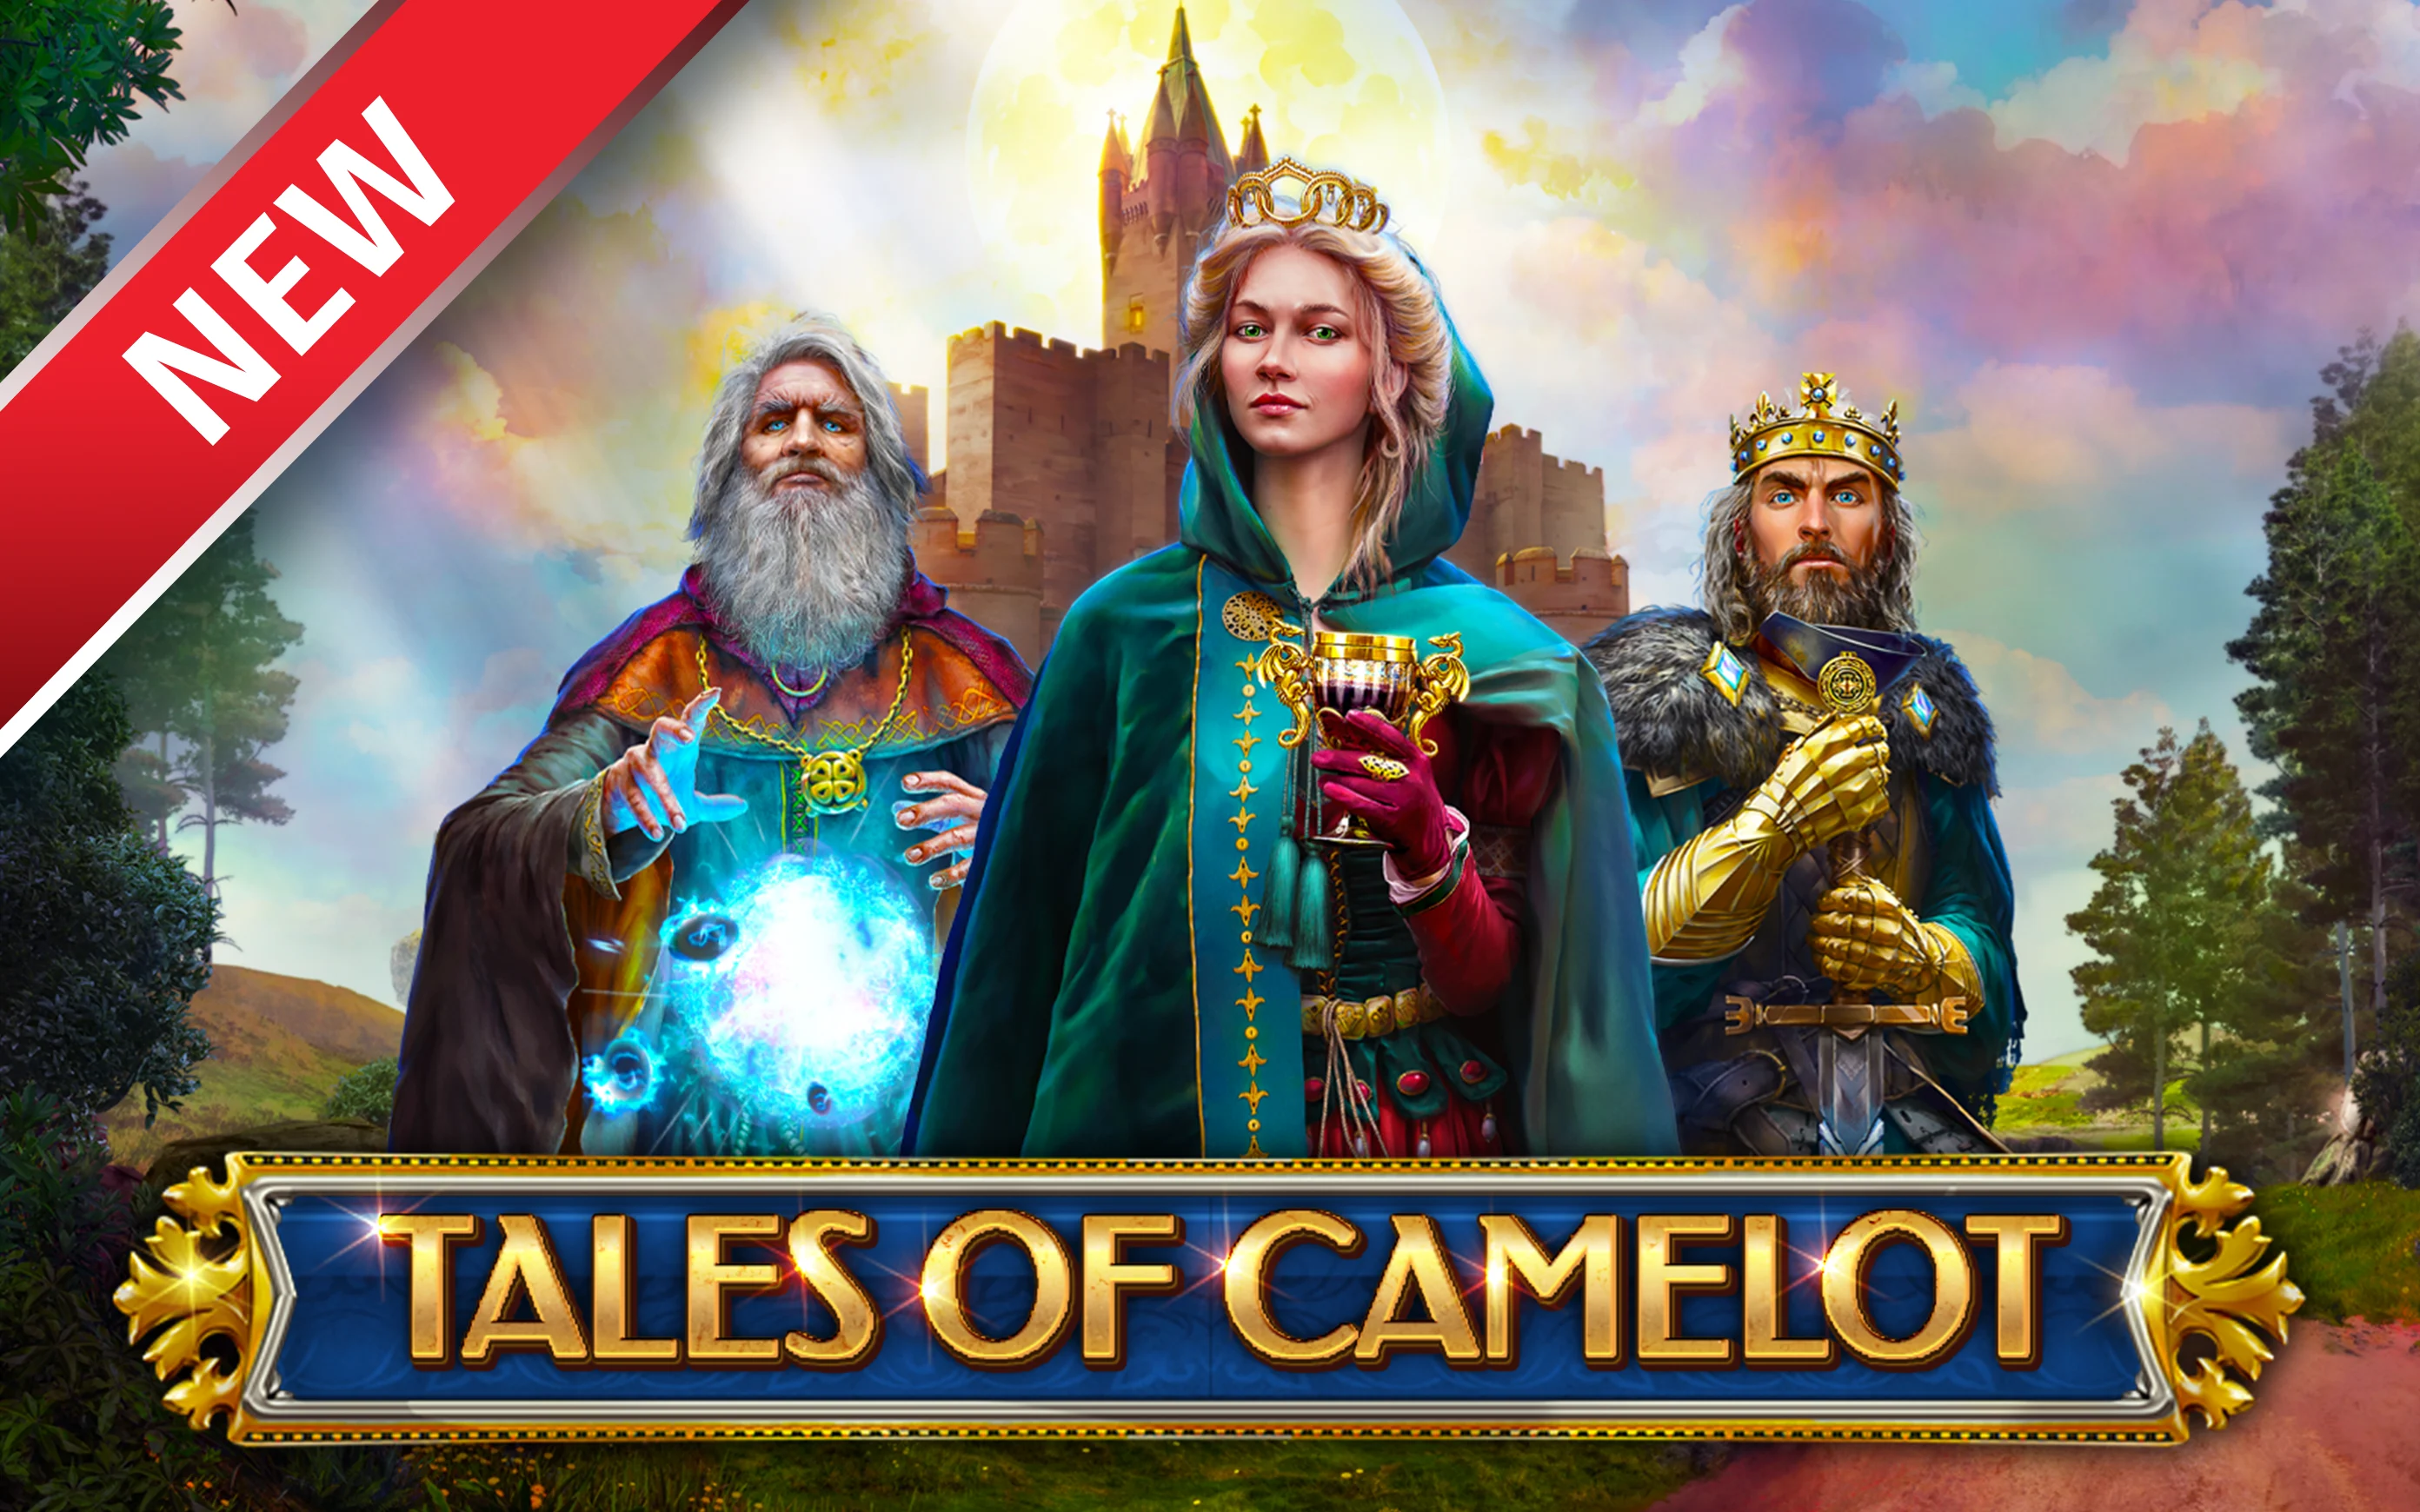 Play Tales Of Camelot on Starcasino.be online casino